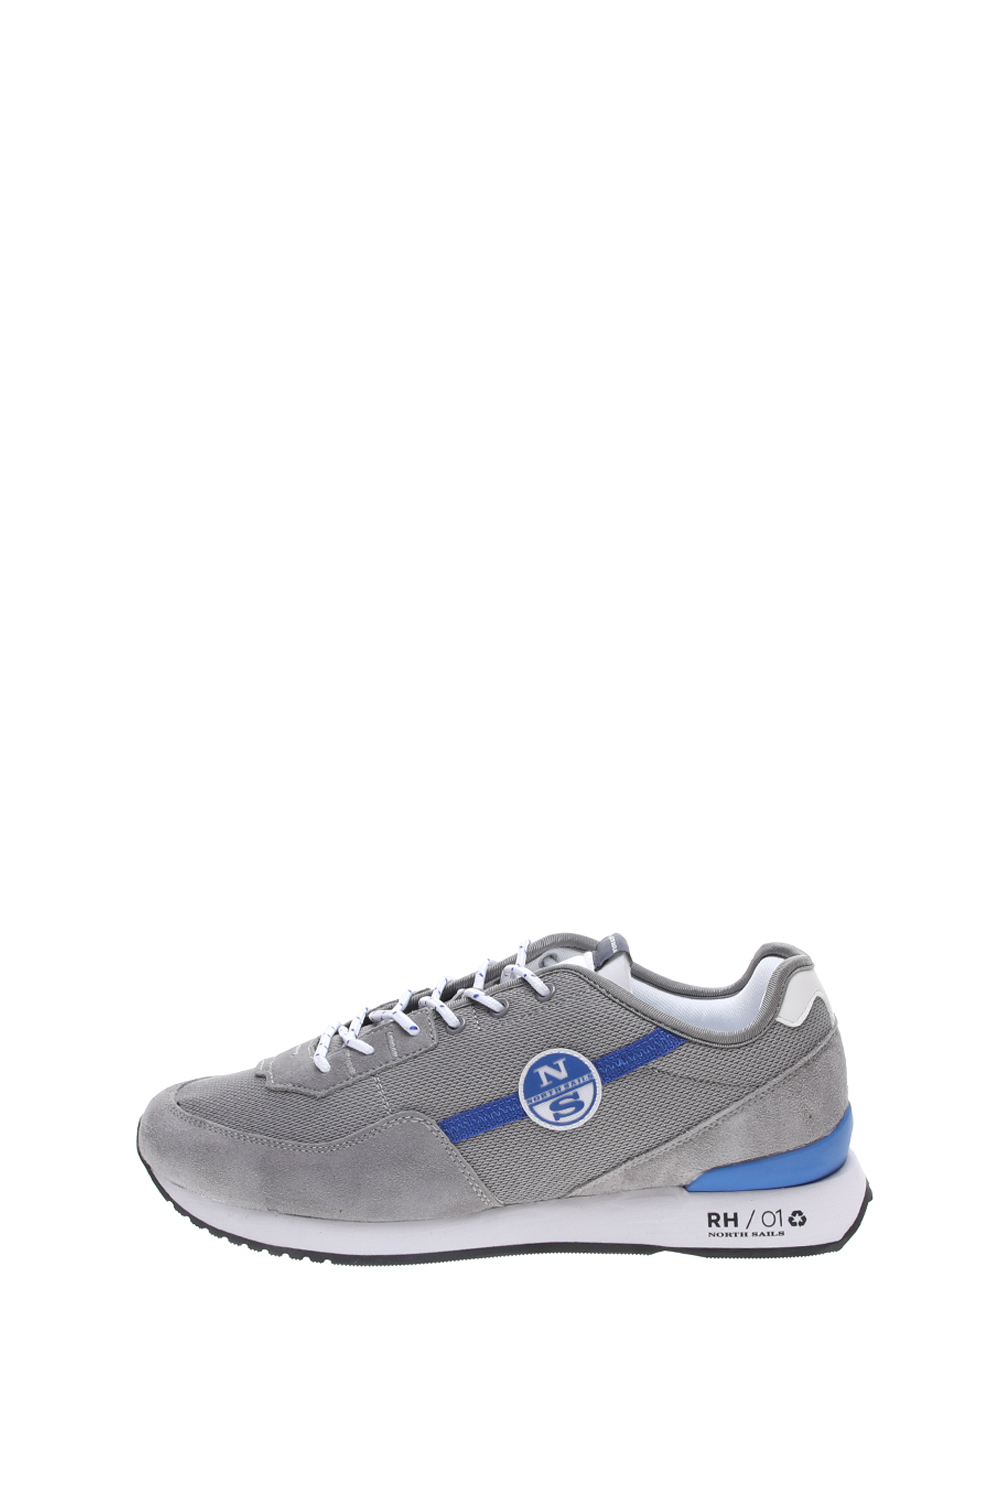 NORTH SAILS – Ανδρικά sneakers NORTH SAILS RECY γκρι μπλε 1816210.0-00G0